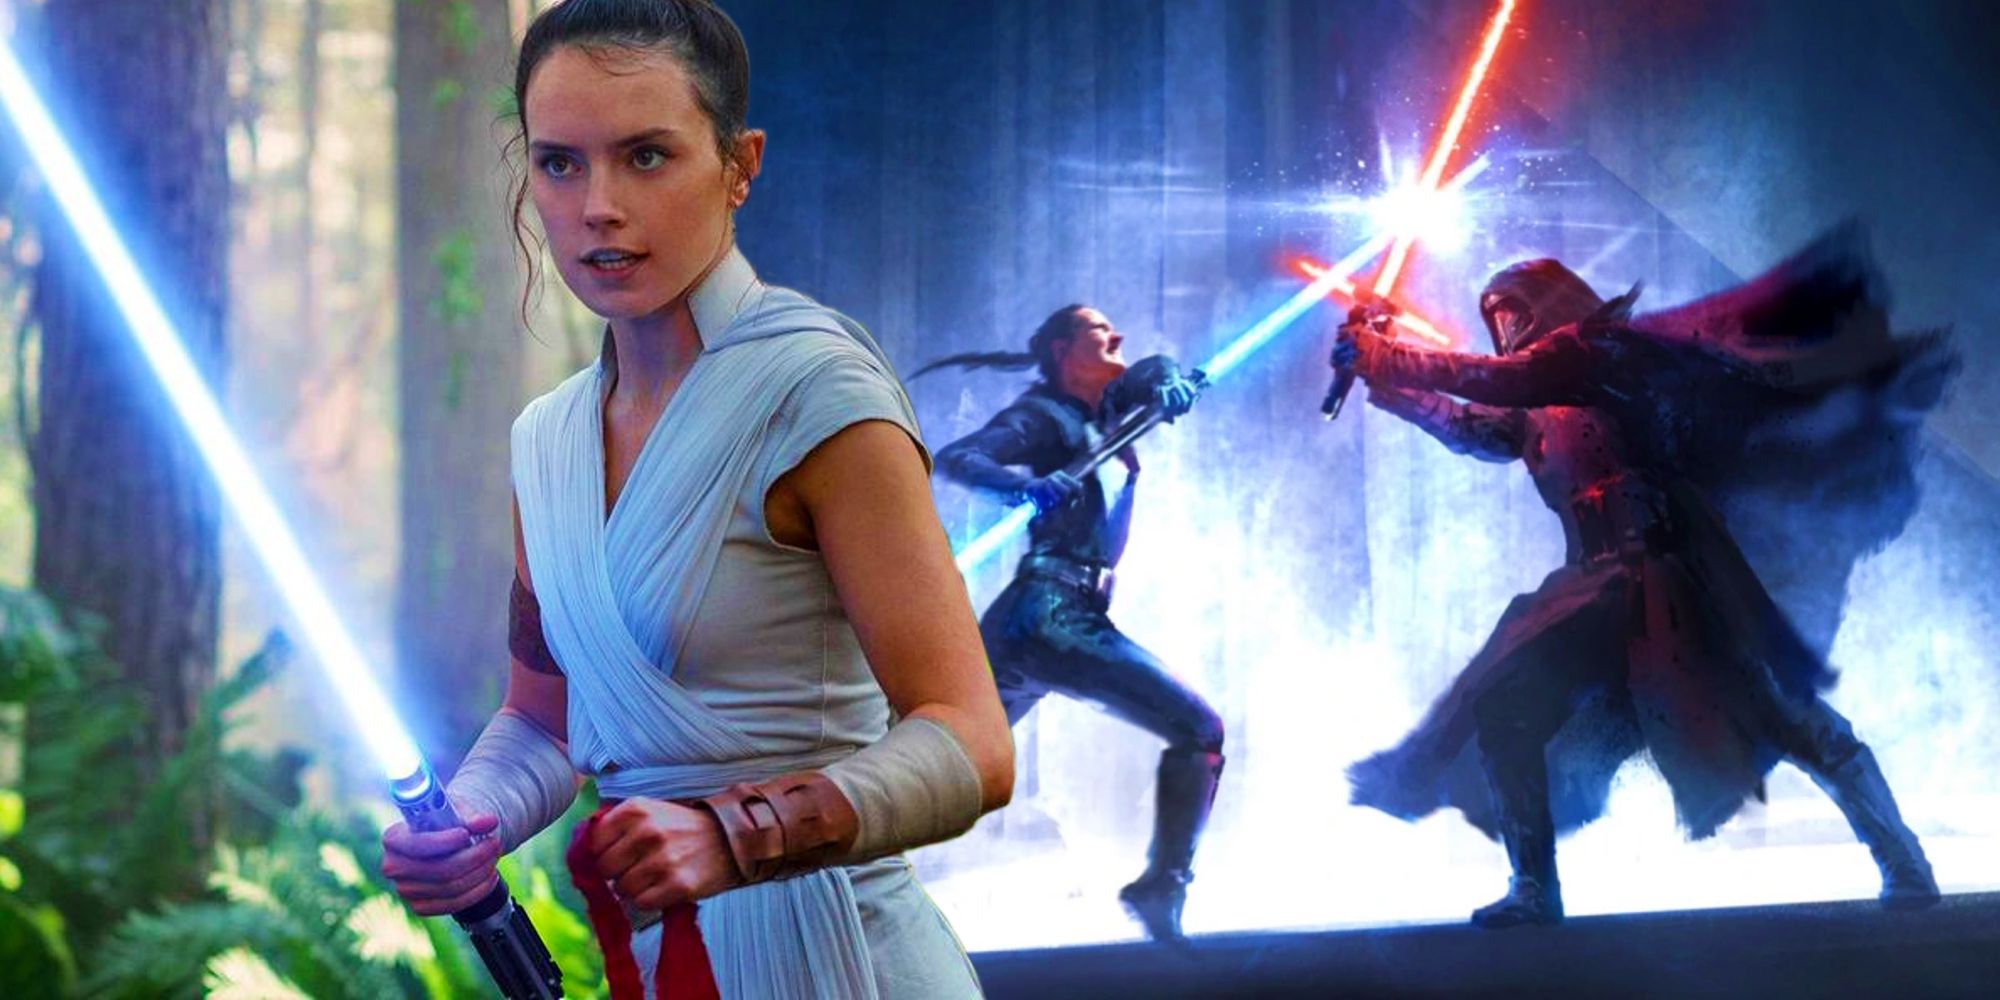 Rey Skywalker holding her lightsaber next to concept art for Duel of the Fates